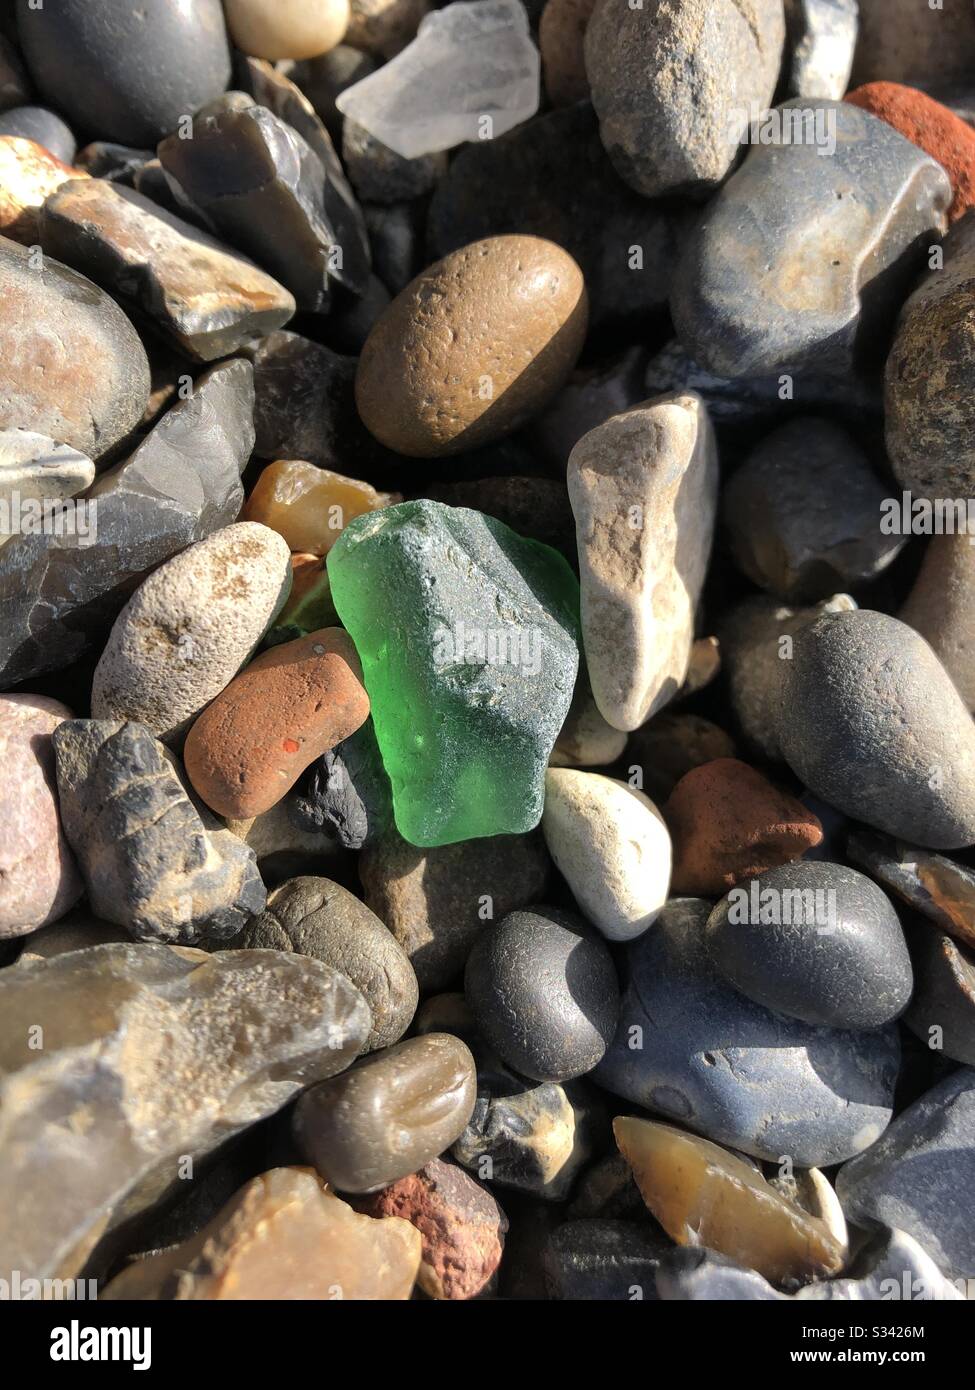 Emerald green river glass found Thames River London at low tide Stock Photo